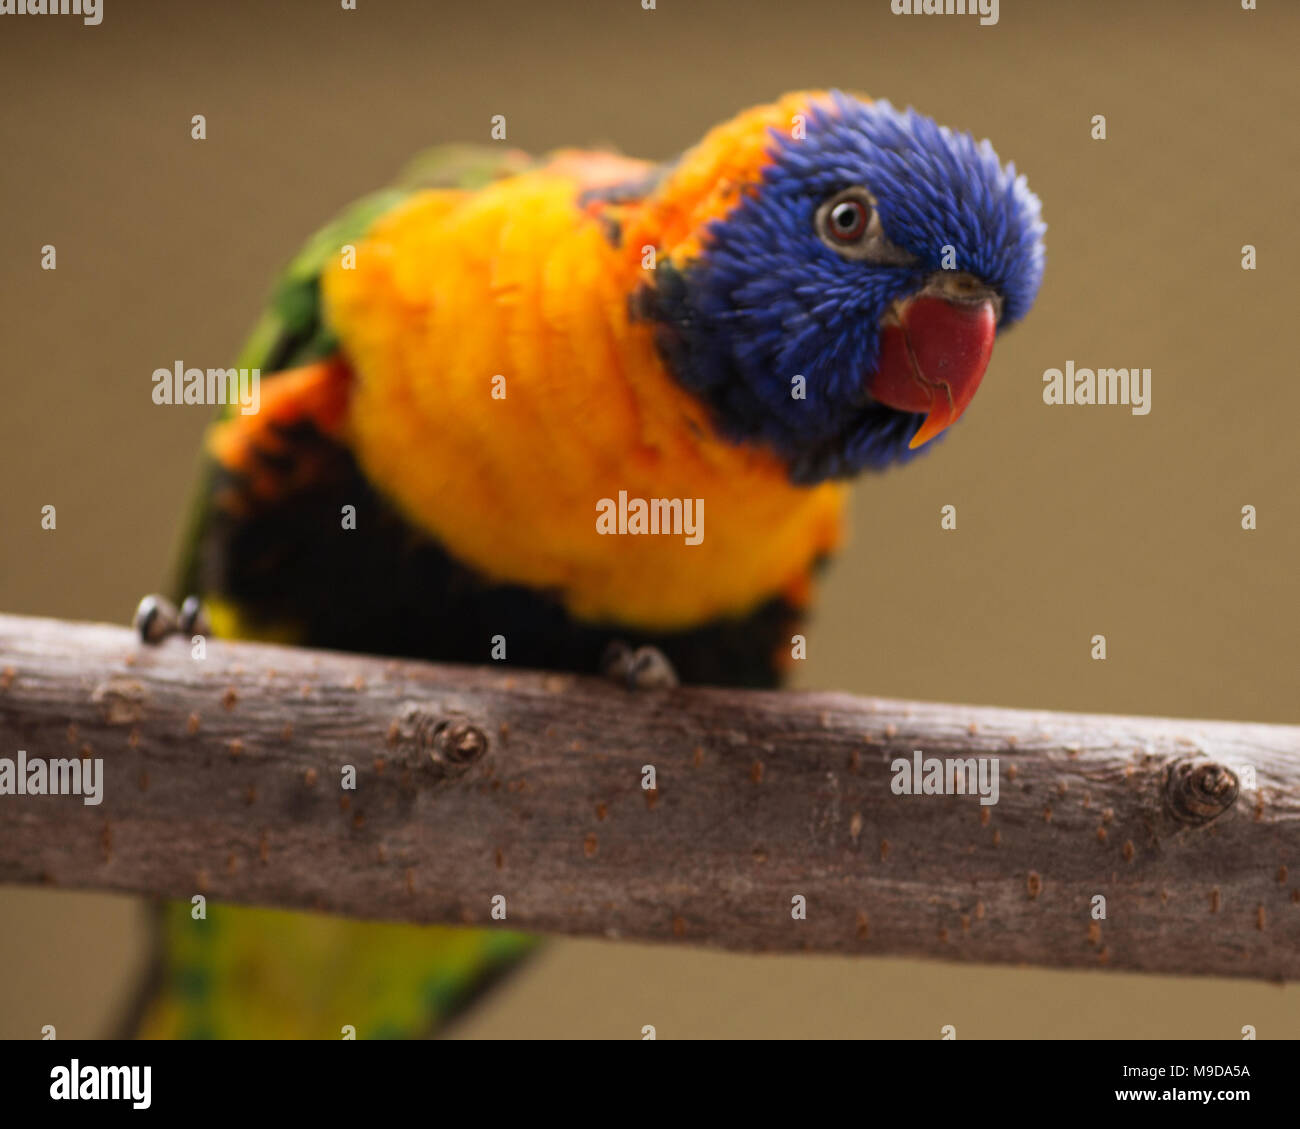 A closeup portrait of a rainbow lorikeet (Trichoglossus moluccanus) perched on a branch. Stock Photo